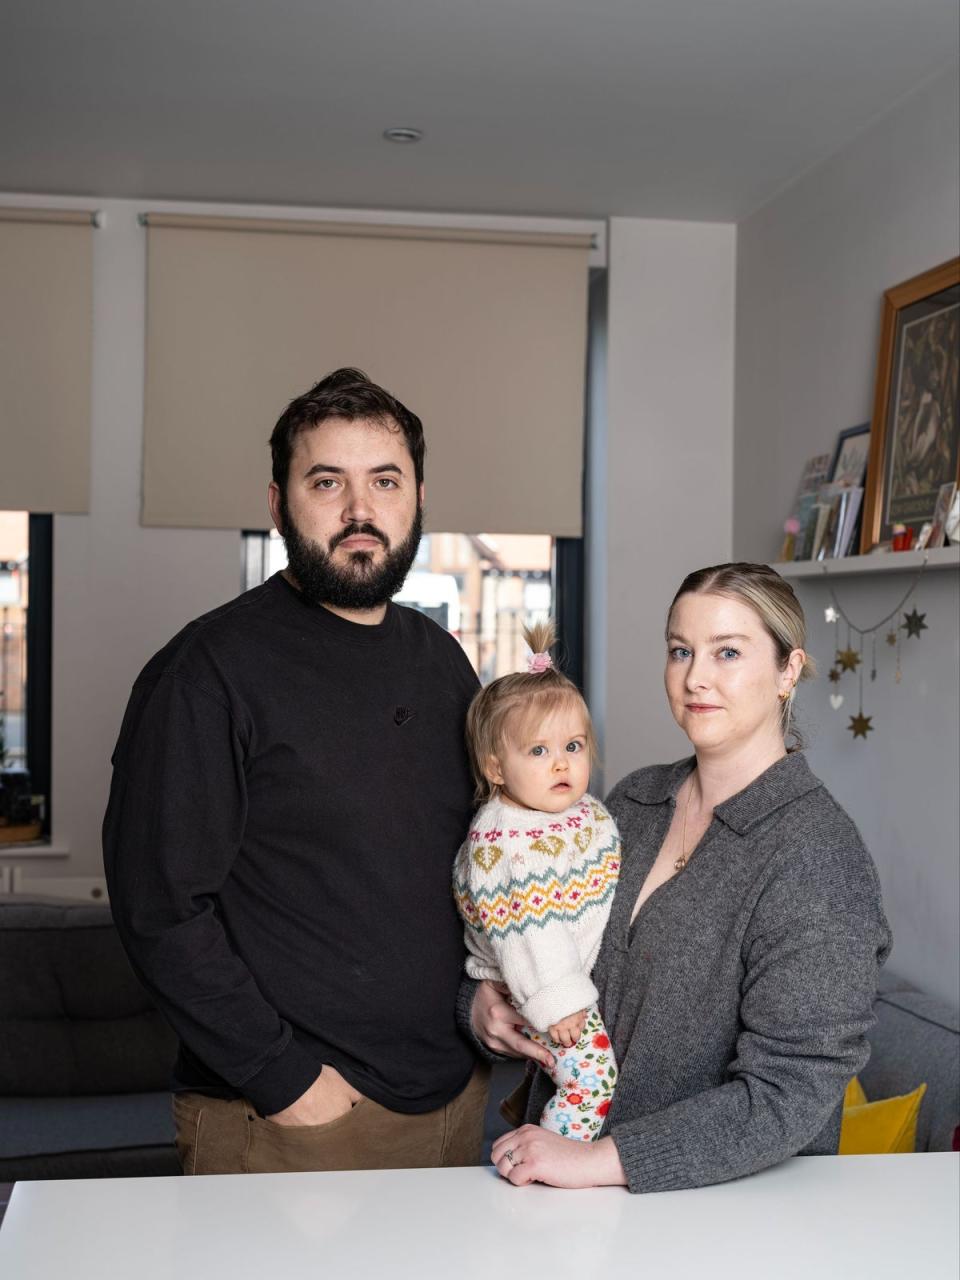 Rob Jenkins with his baby Maeve and partner Katie James who are owners of a property in development John Busch House In Isleworth which has cladding associated with the fire safety scandal (Daniel Hambury/Stella Pictures Ltd)